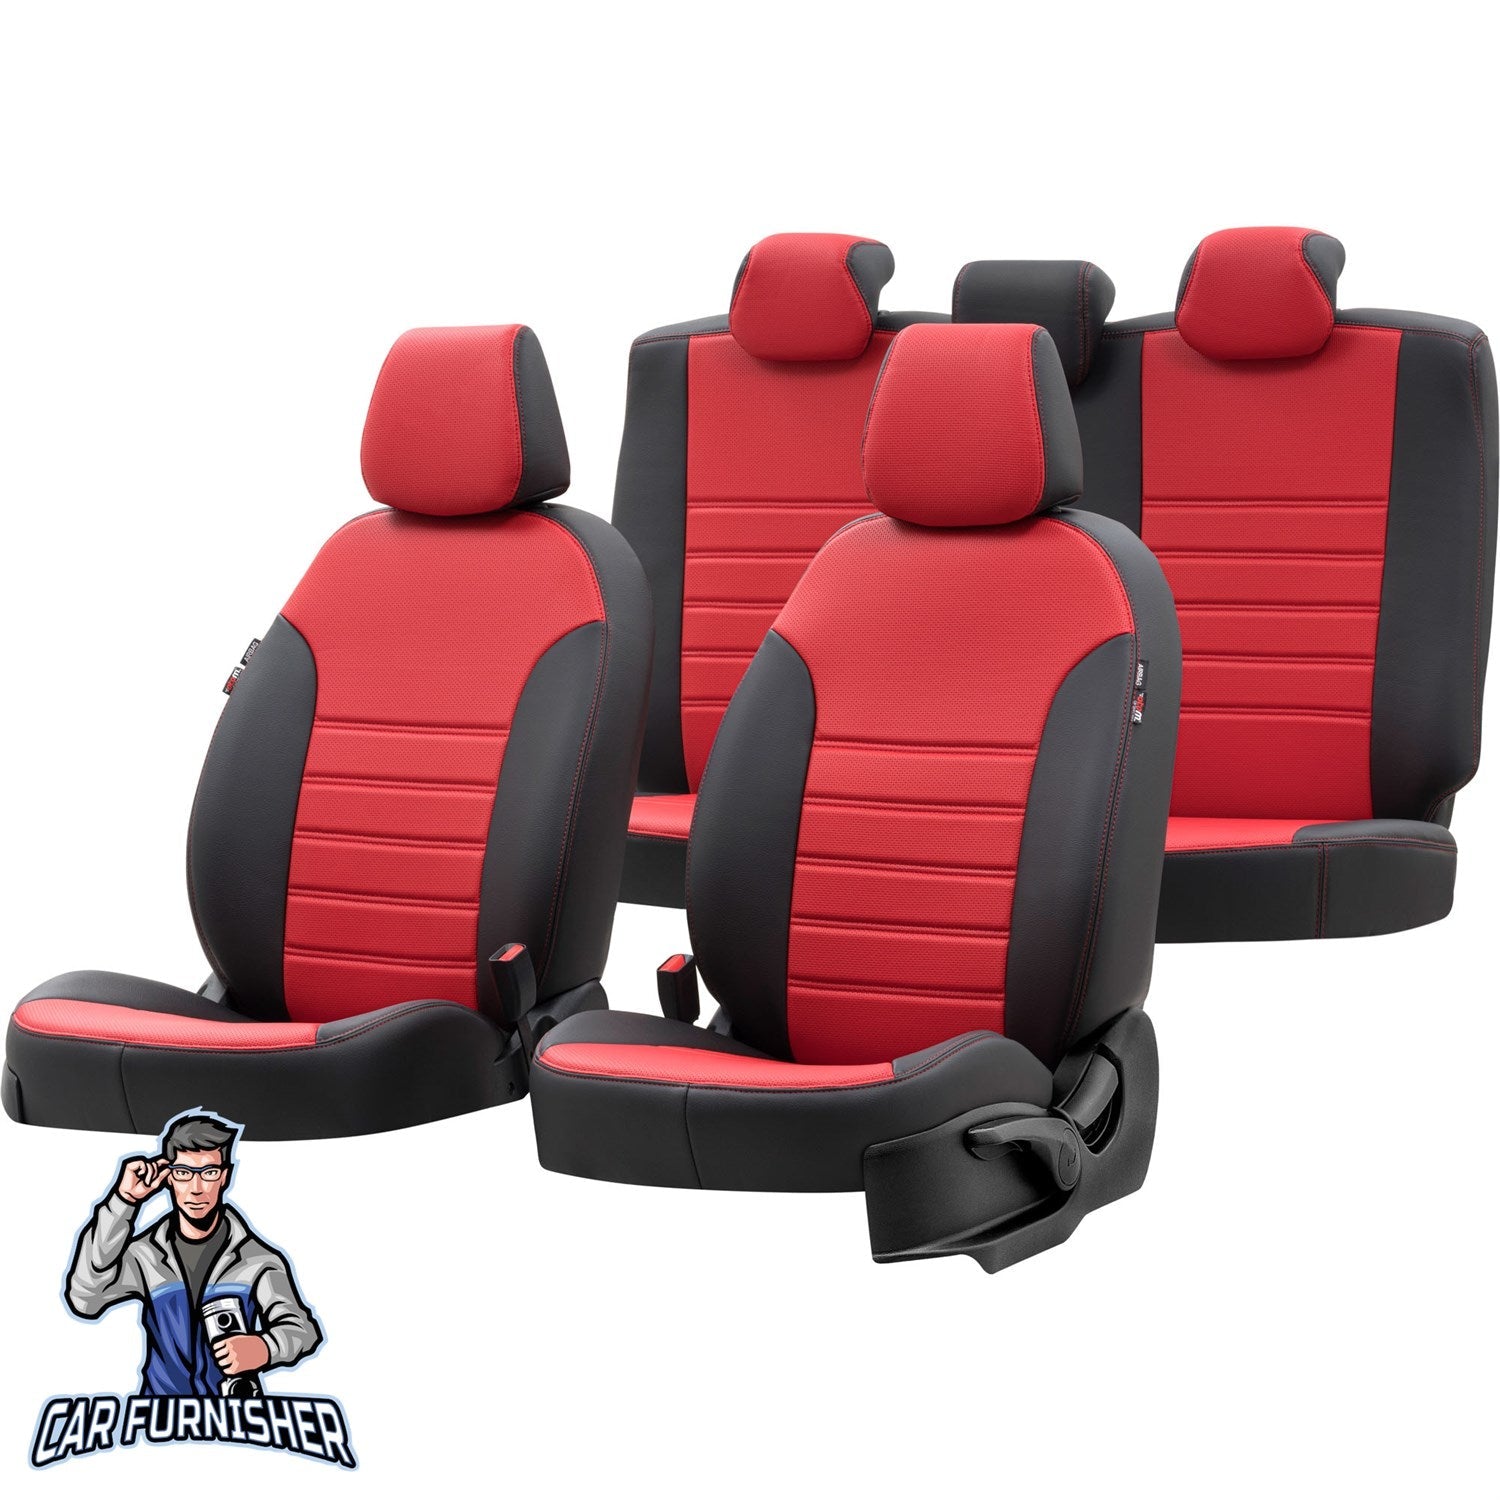 Volkswagen Jetta Seat Cover New York Leather Design Red Leather